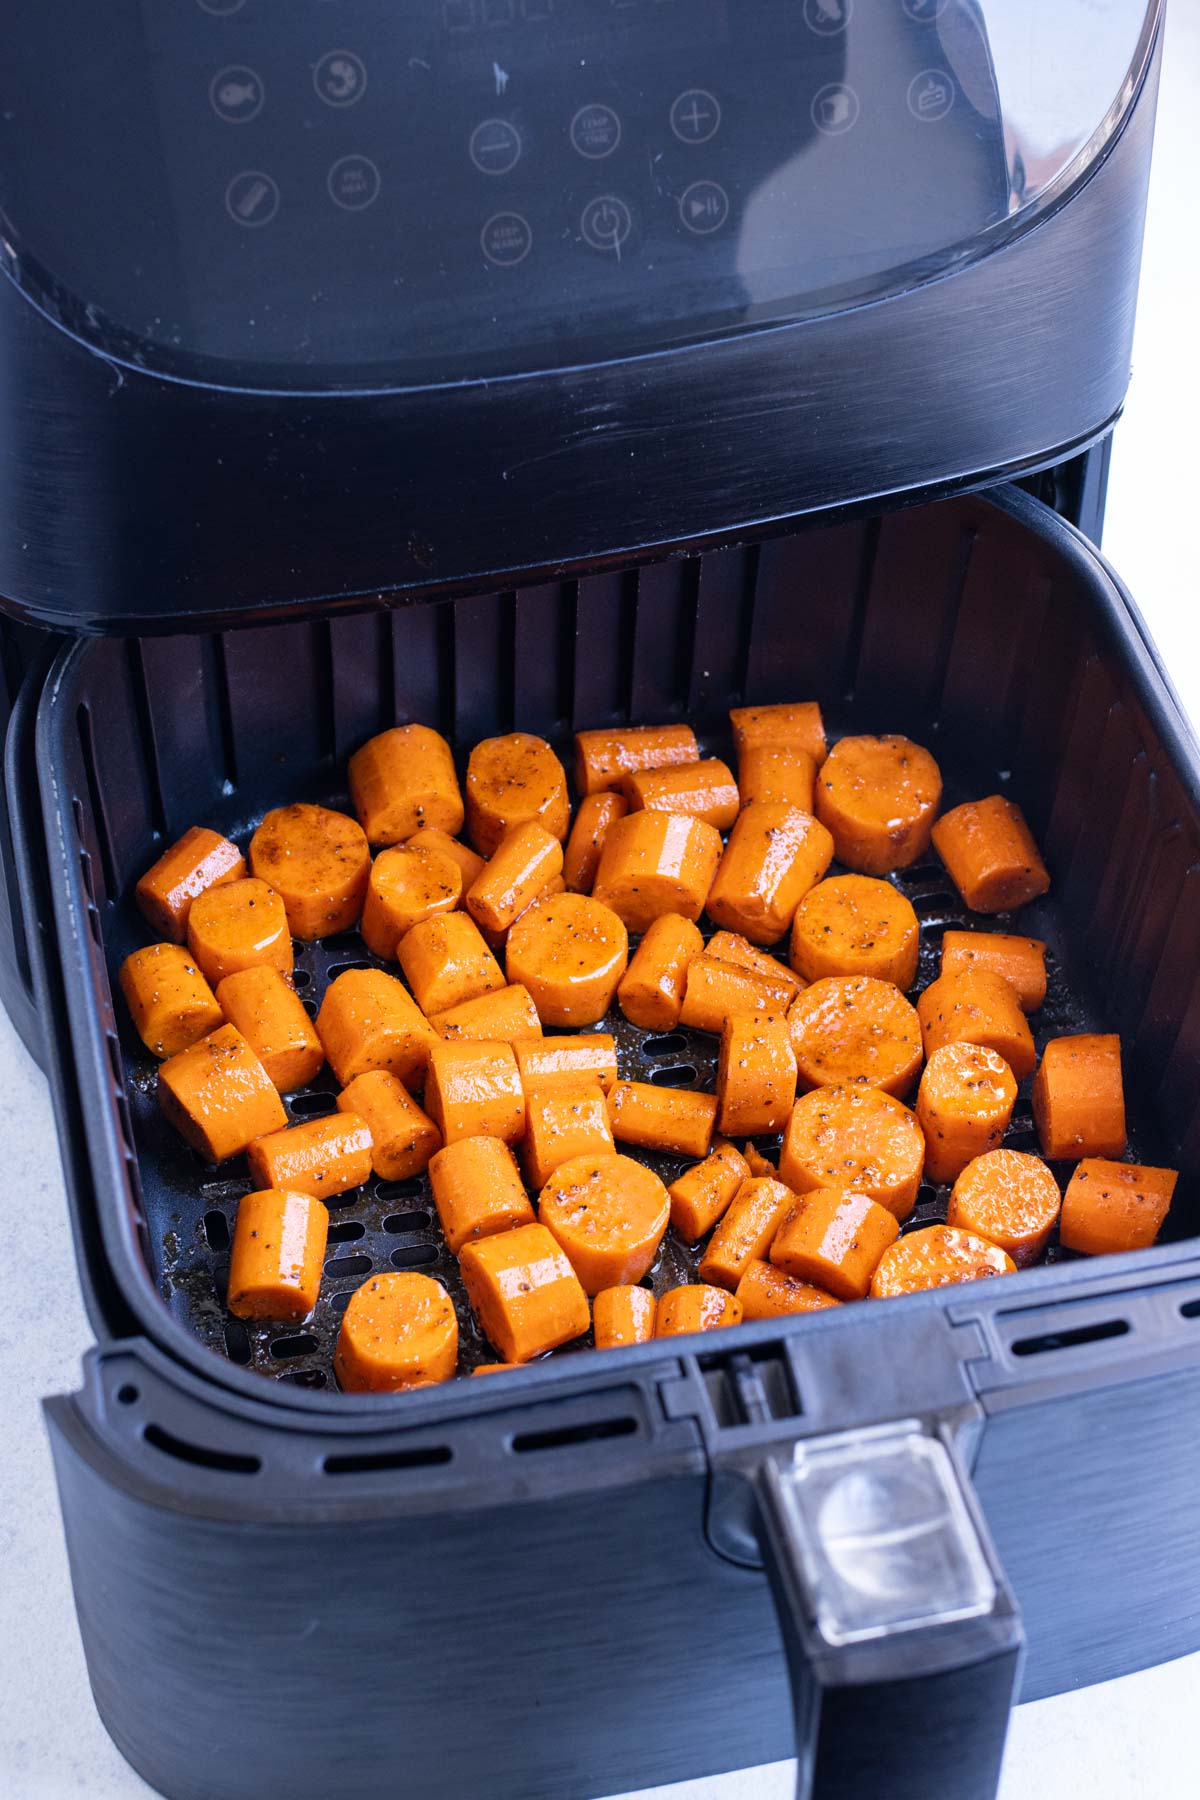 Carrots are cooked in an air fryer for an easy side.